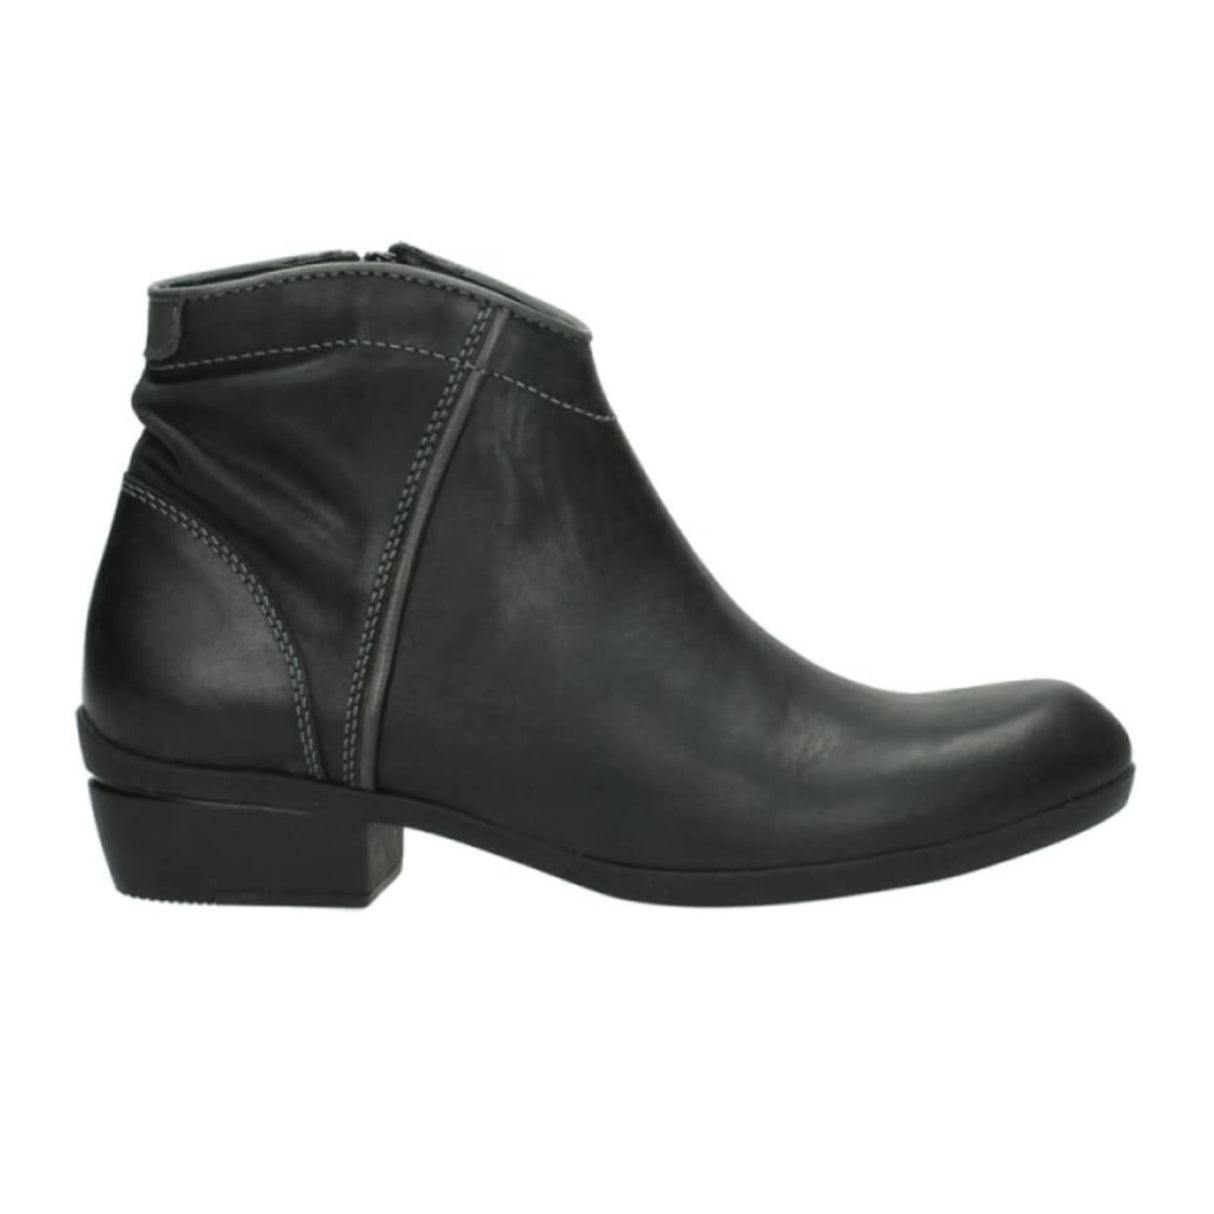 Wolky Winchester Ankle Boot (Women) - Black Boots - Fashion - Ankle Boot - The Heel Shoe Fitters